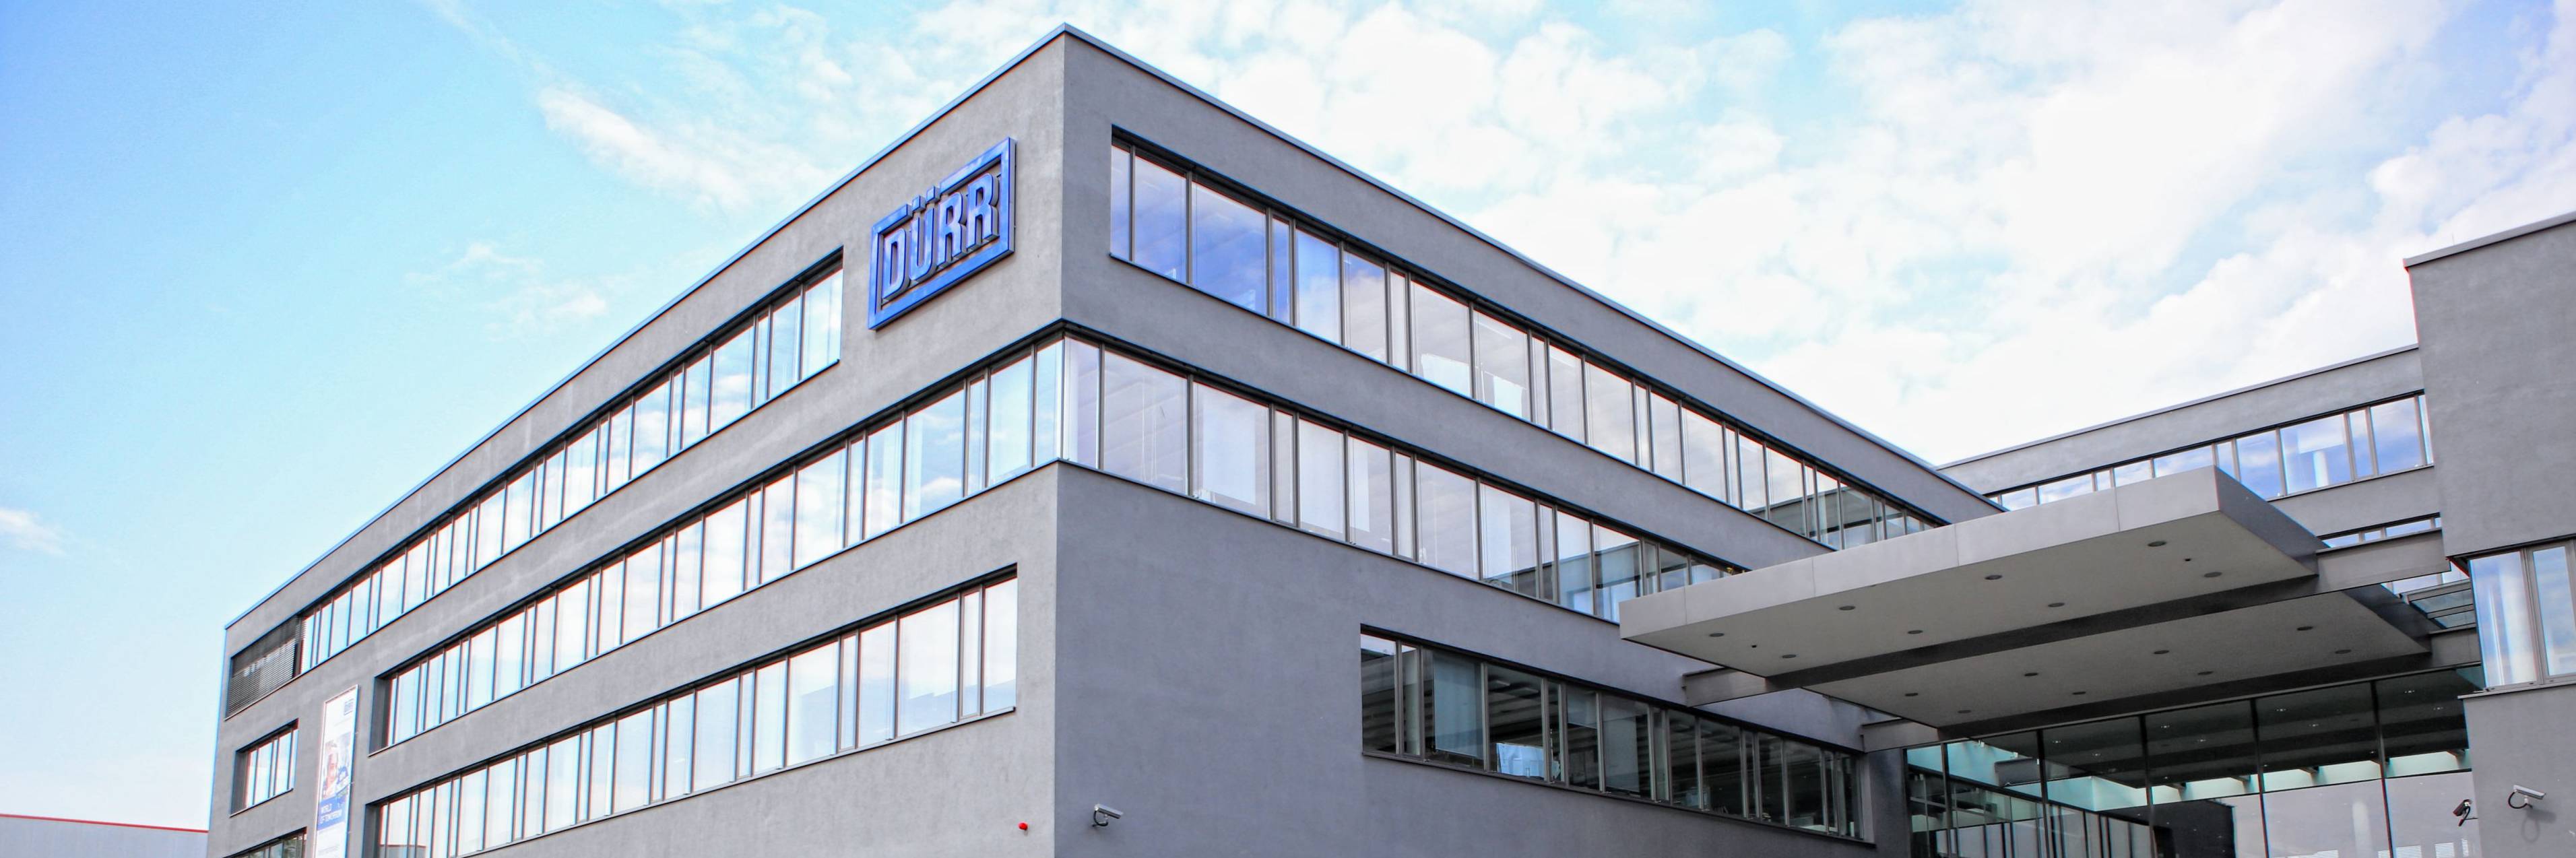 duerr location headquarters in germany